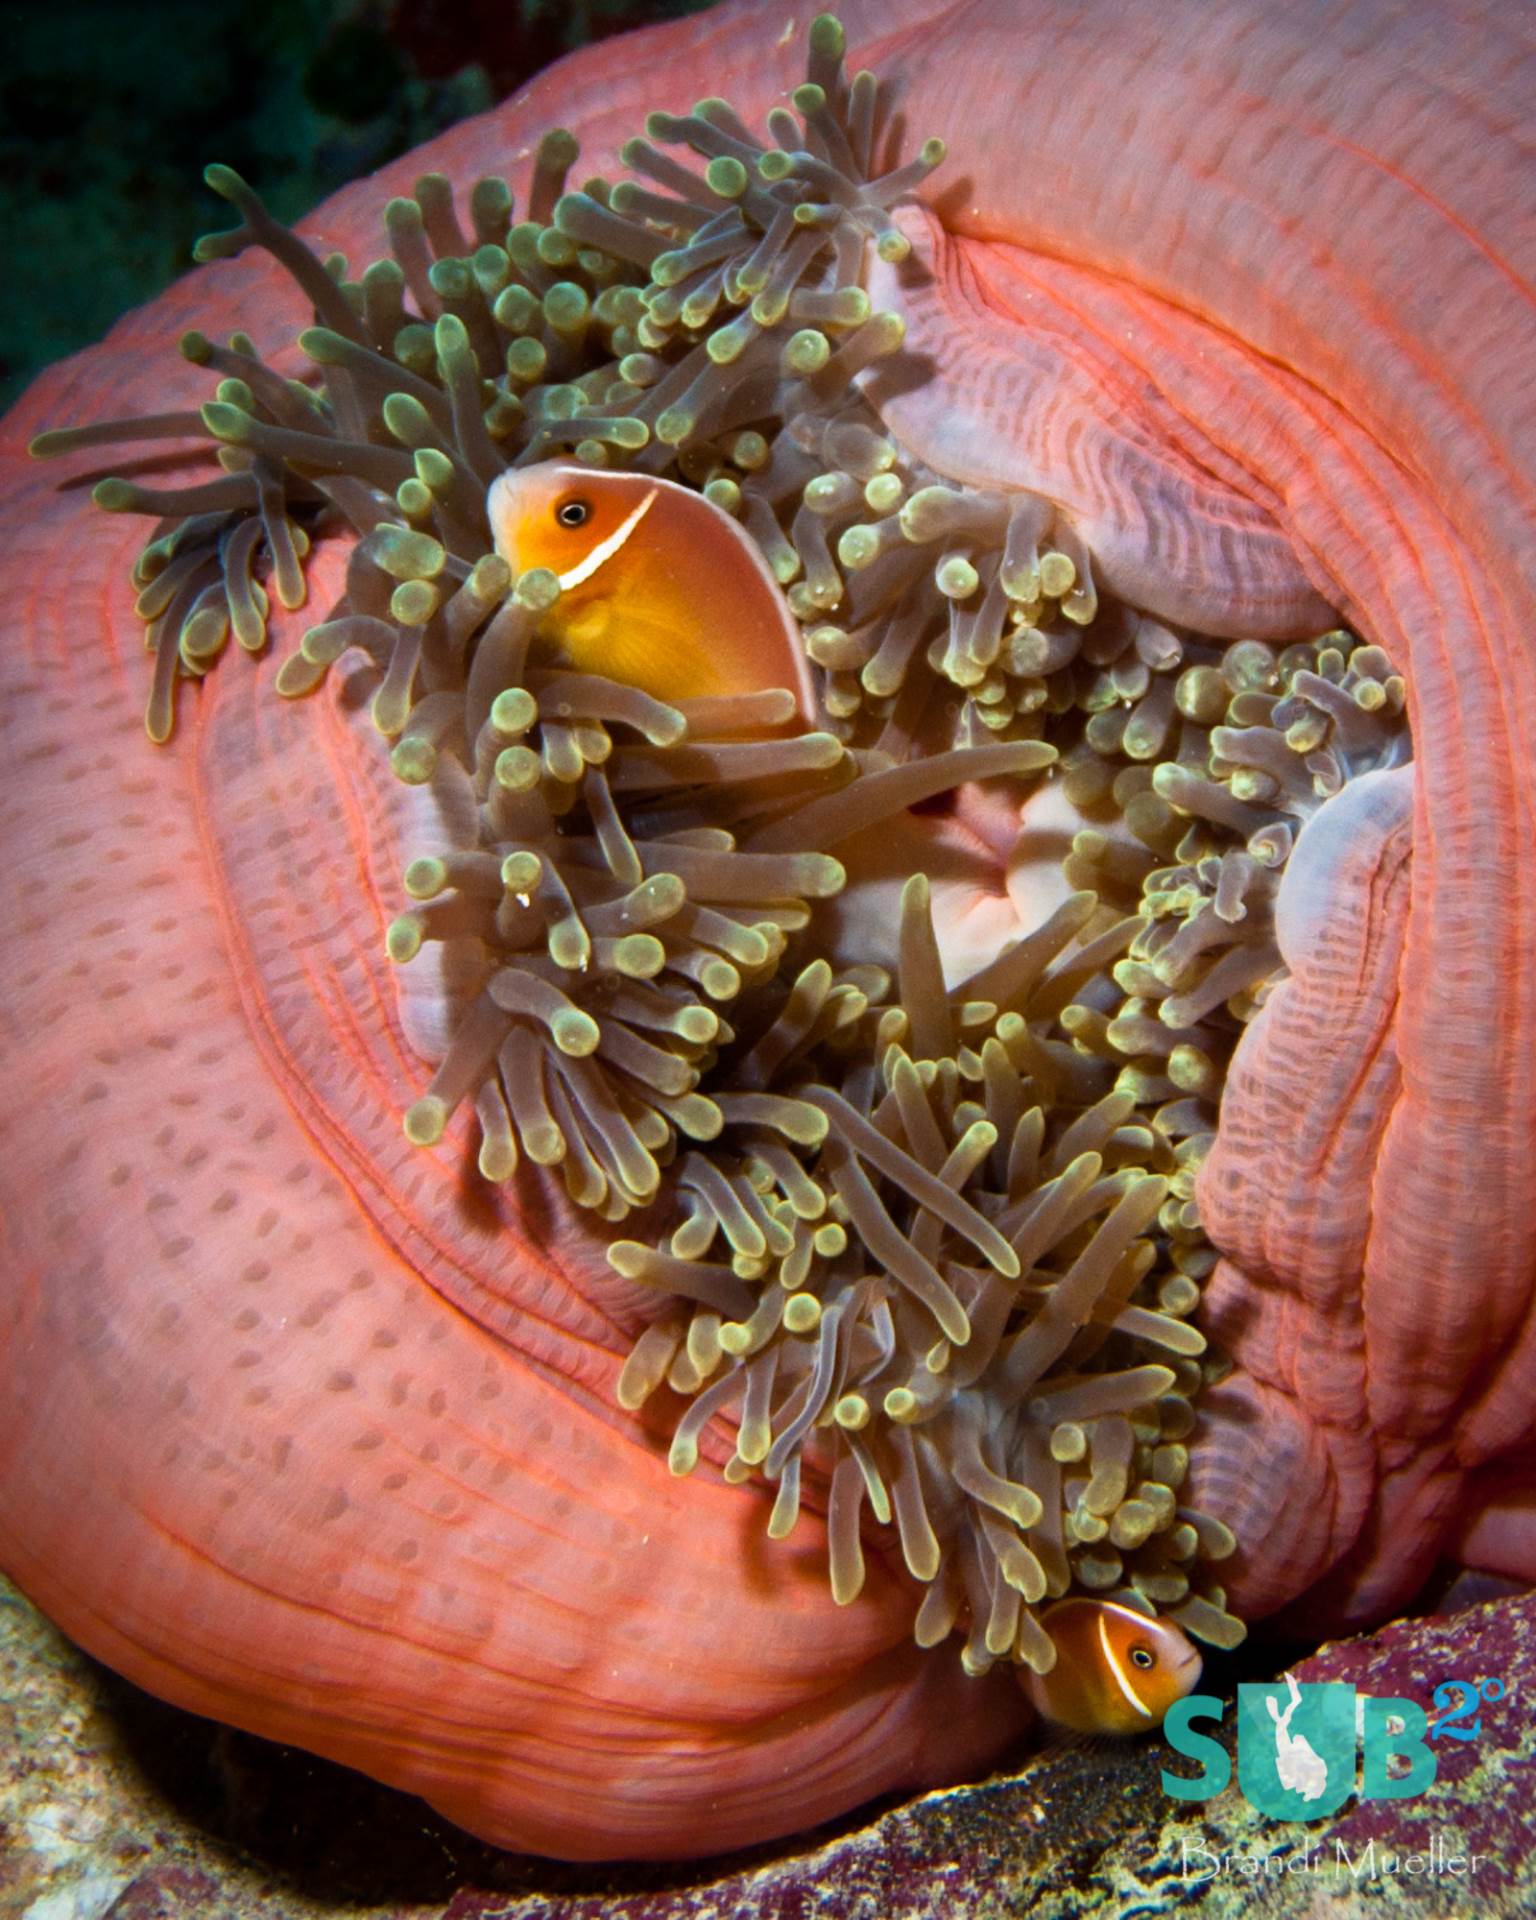 Palau's reefs are full of beautiful multi-colored anemones like this pink one.